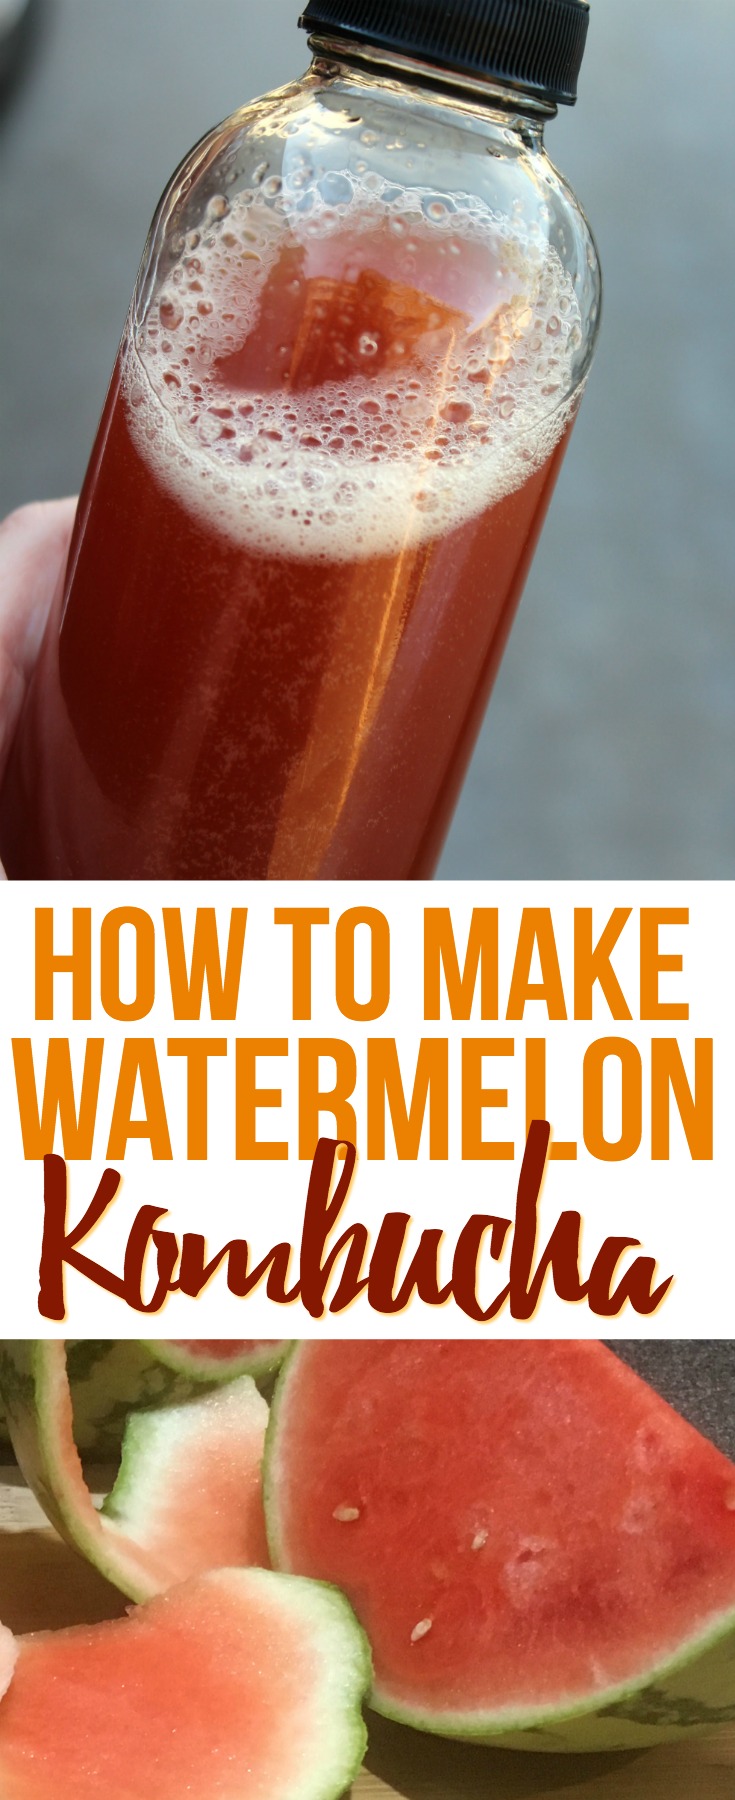 Watermelon Kombucha is the most recent awesome brew that I have tried. Learn how to second ferment your kombucha with a juicy, ripe watermelon! 